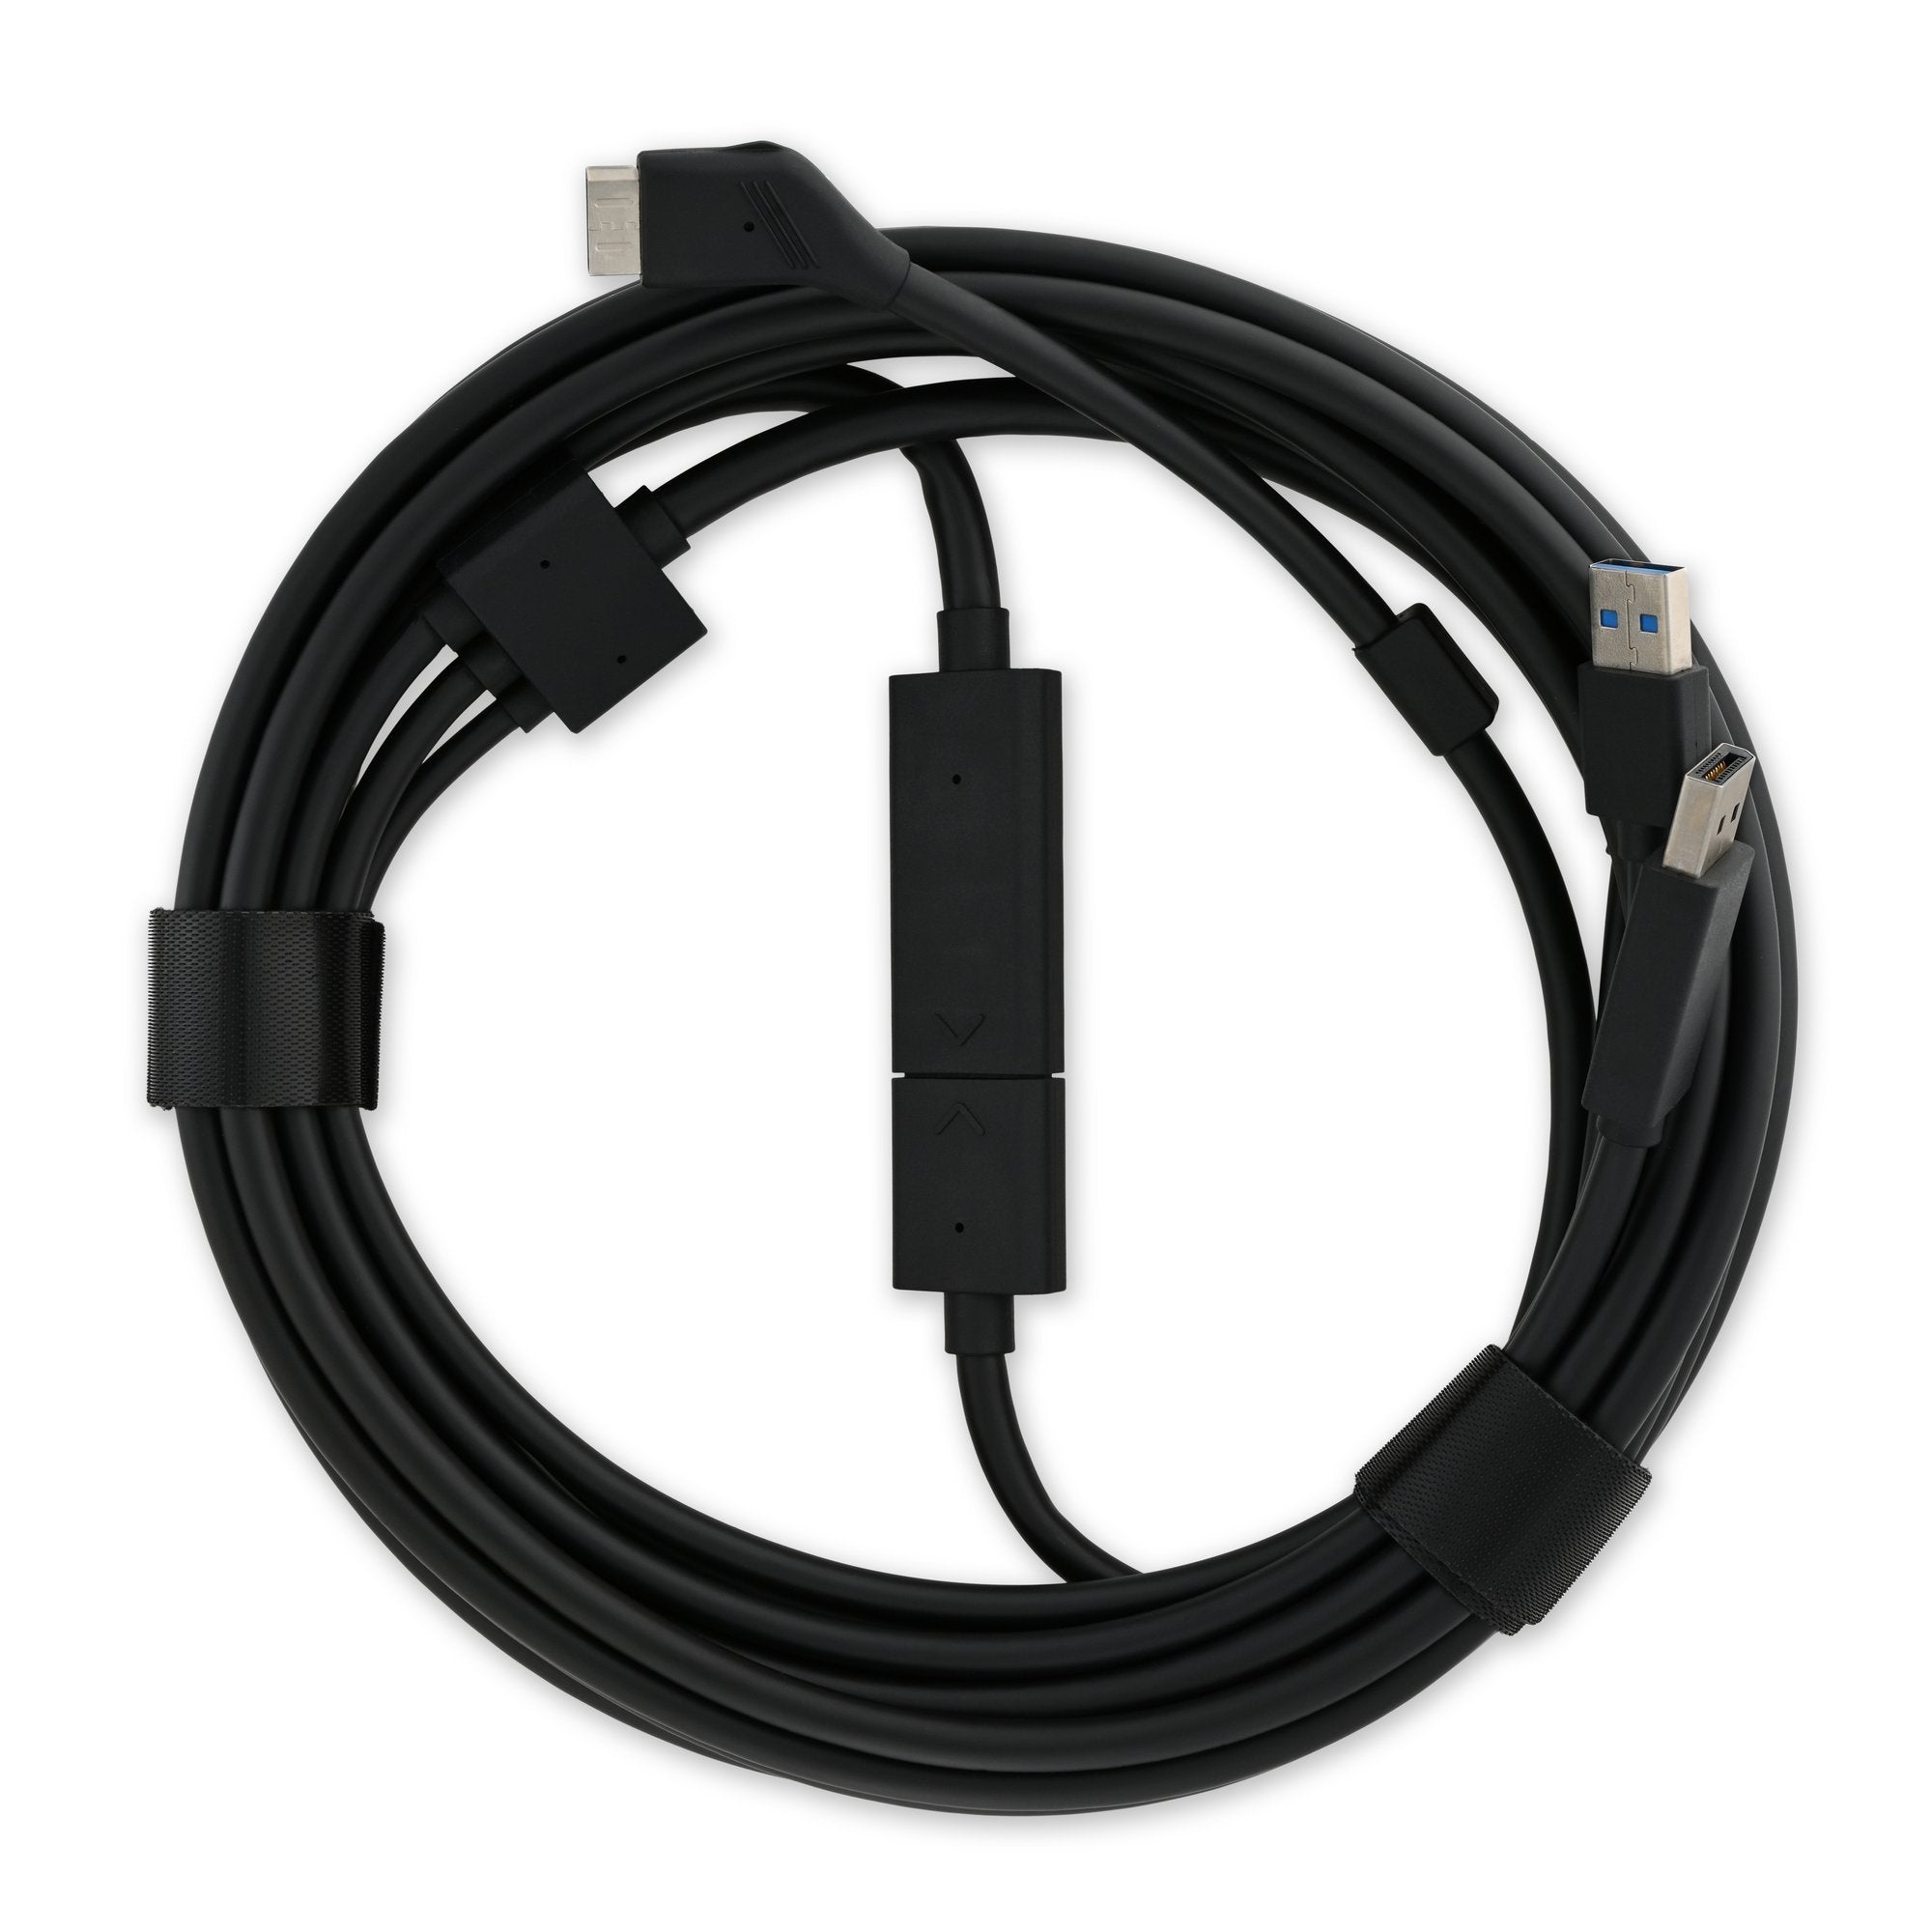 Valve Index Tether and Trident Cables Used